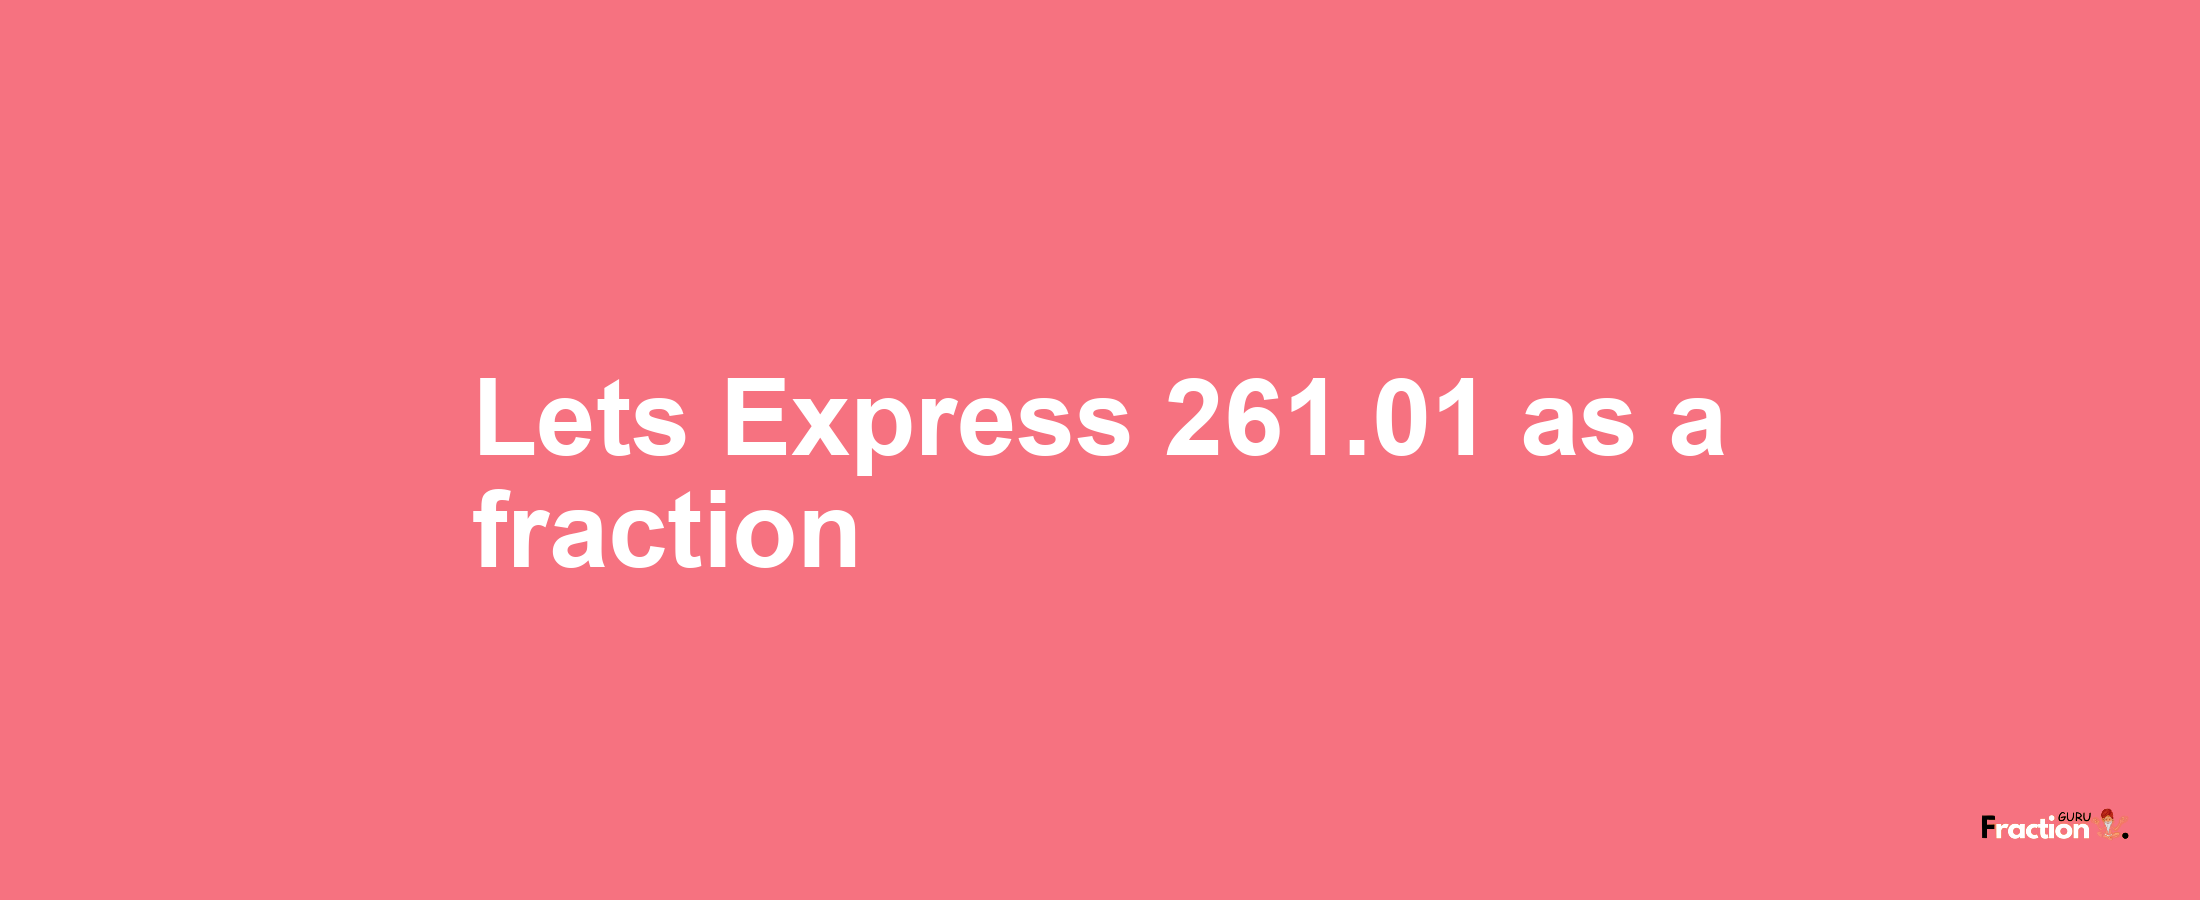 Lets Express 261.01 as afraction